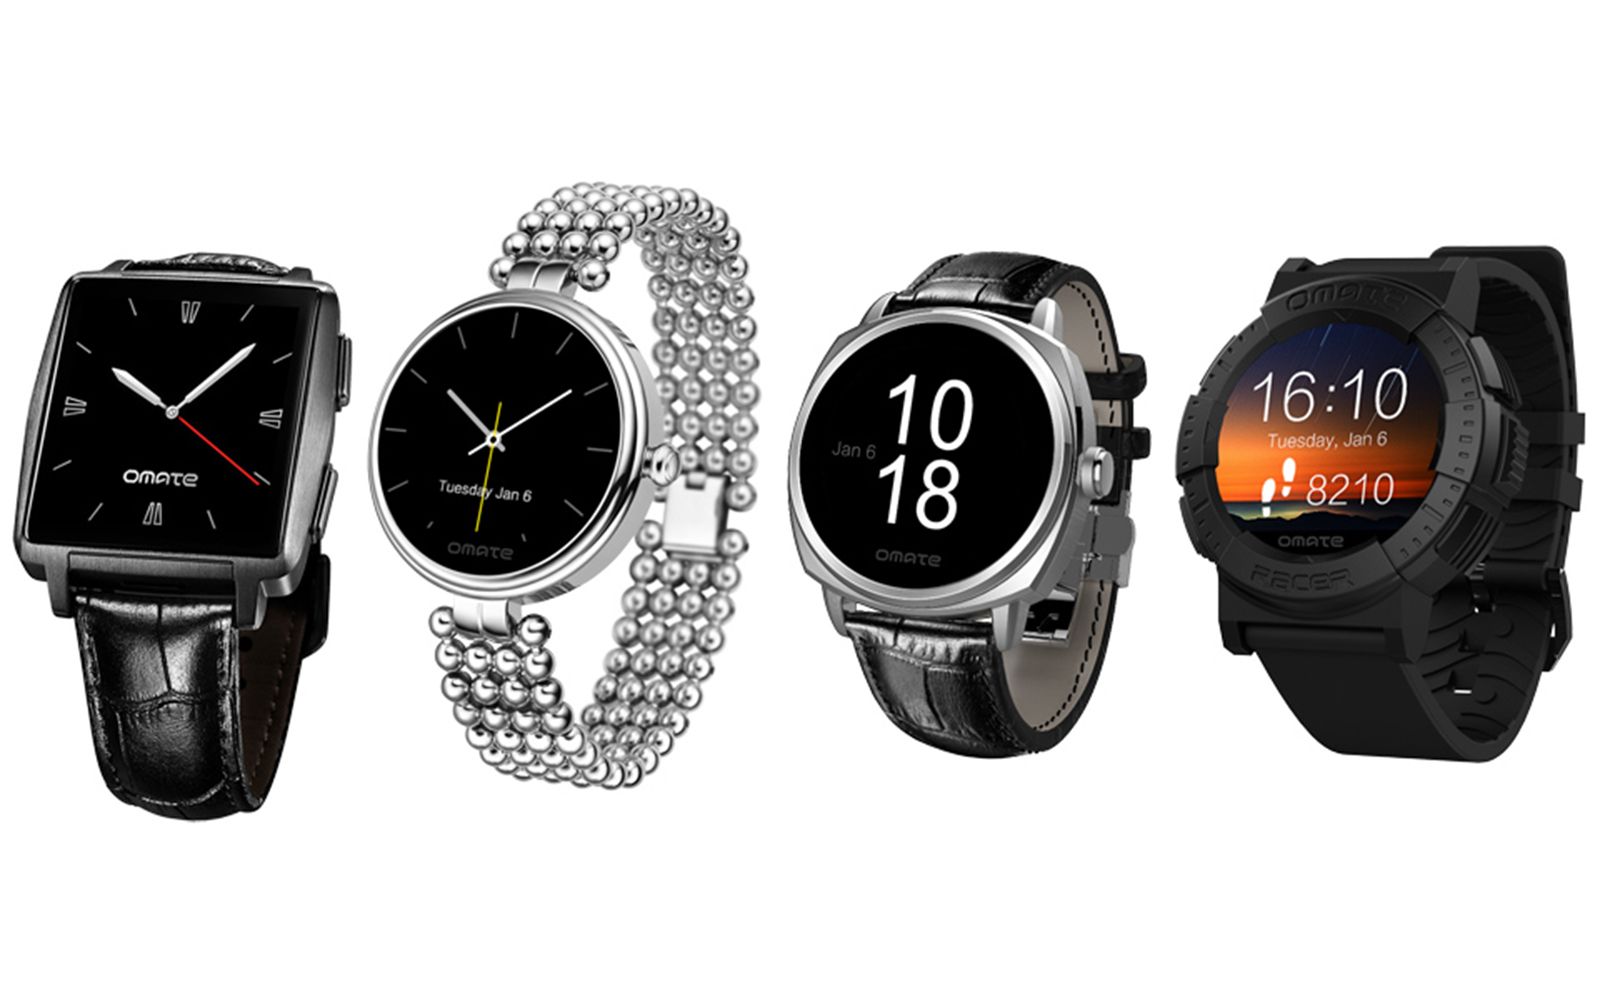 sports and fitness wearables to look forward to in 2015 image 11